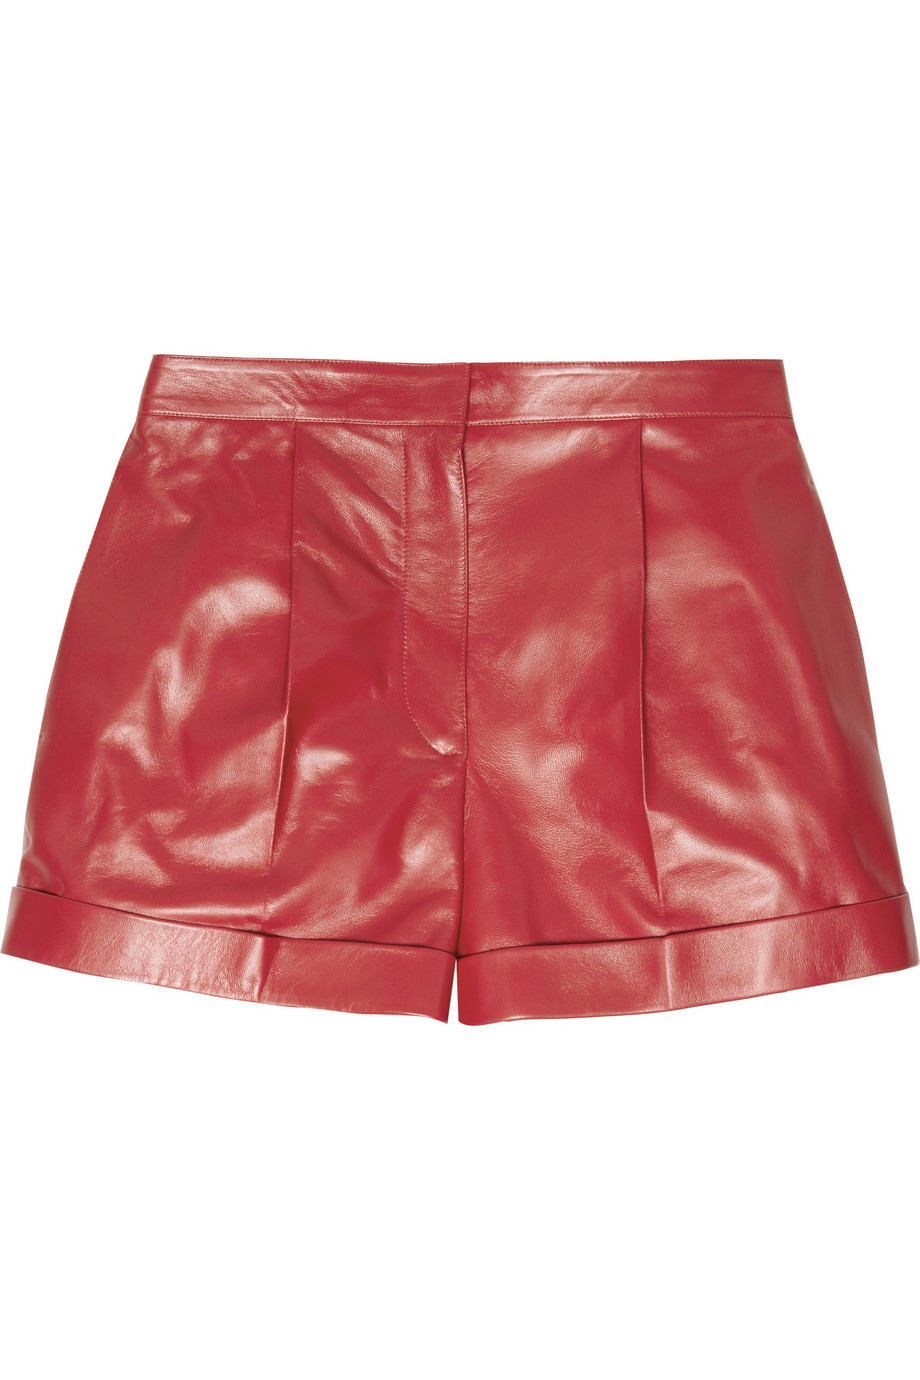 Lyst - Valentino Cash & Rocket Stud-Embellished Leather Shorts in Red